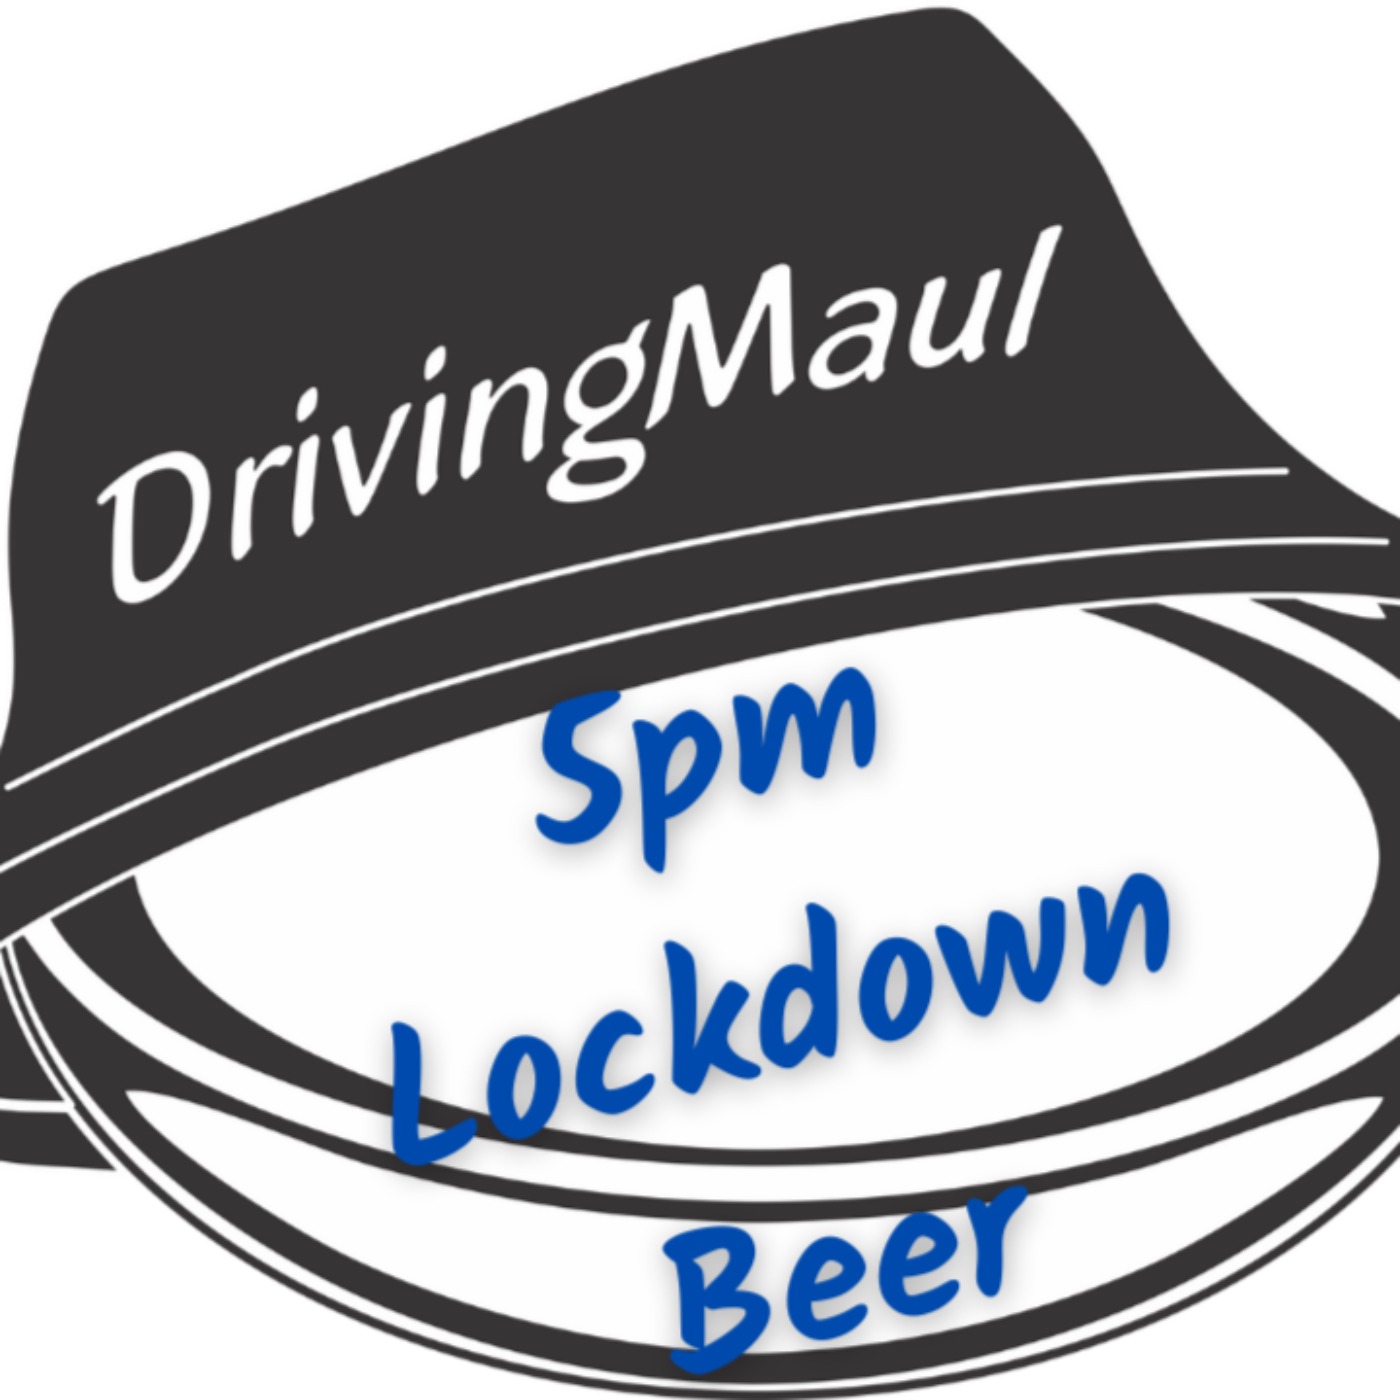 5pm Lockdown Beers & Rugby Chat - Lincoln McClutchie Finds A Home